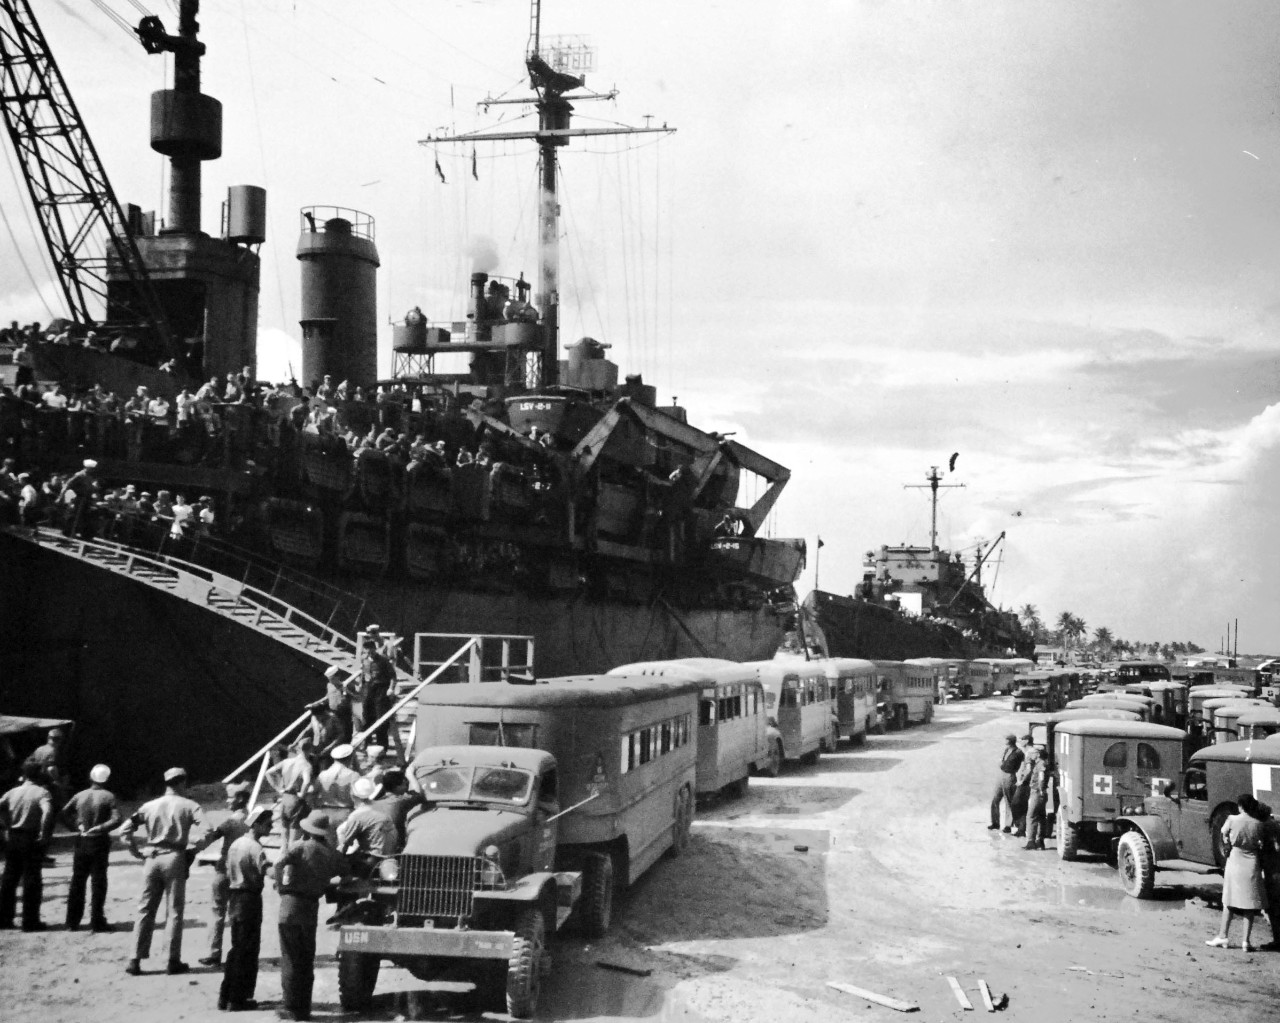 80-G-490495:   Allied Prisoners of War, 1945.   Sixty buses and ambulances line up to meet USS Ozark (LSV-2) when it arrived at Guam, Mariana Islands with 970 liberated Prisoners of War.   Photograph received September 1945.   Official U.S. Navy photograph, now in the collections of the National Archives.  (2014/05/29).    The original is a small photograph.   